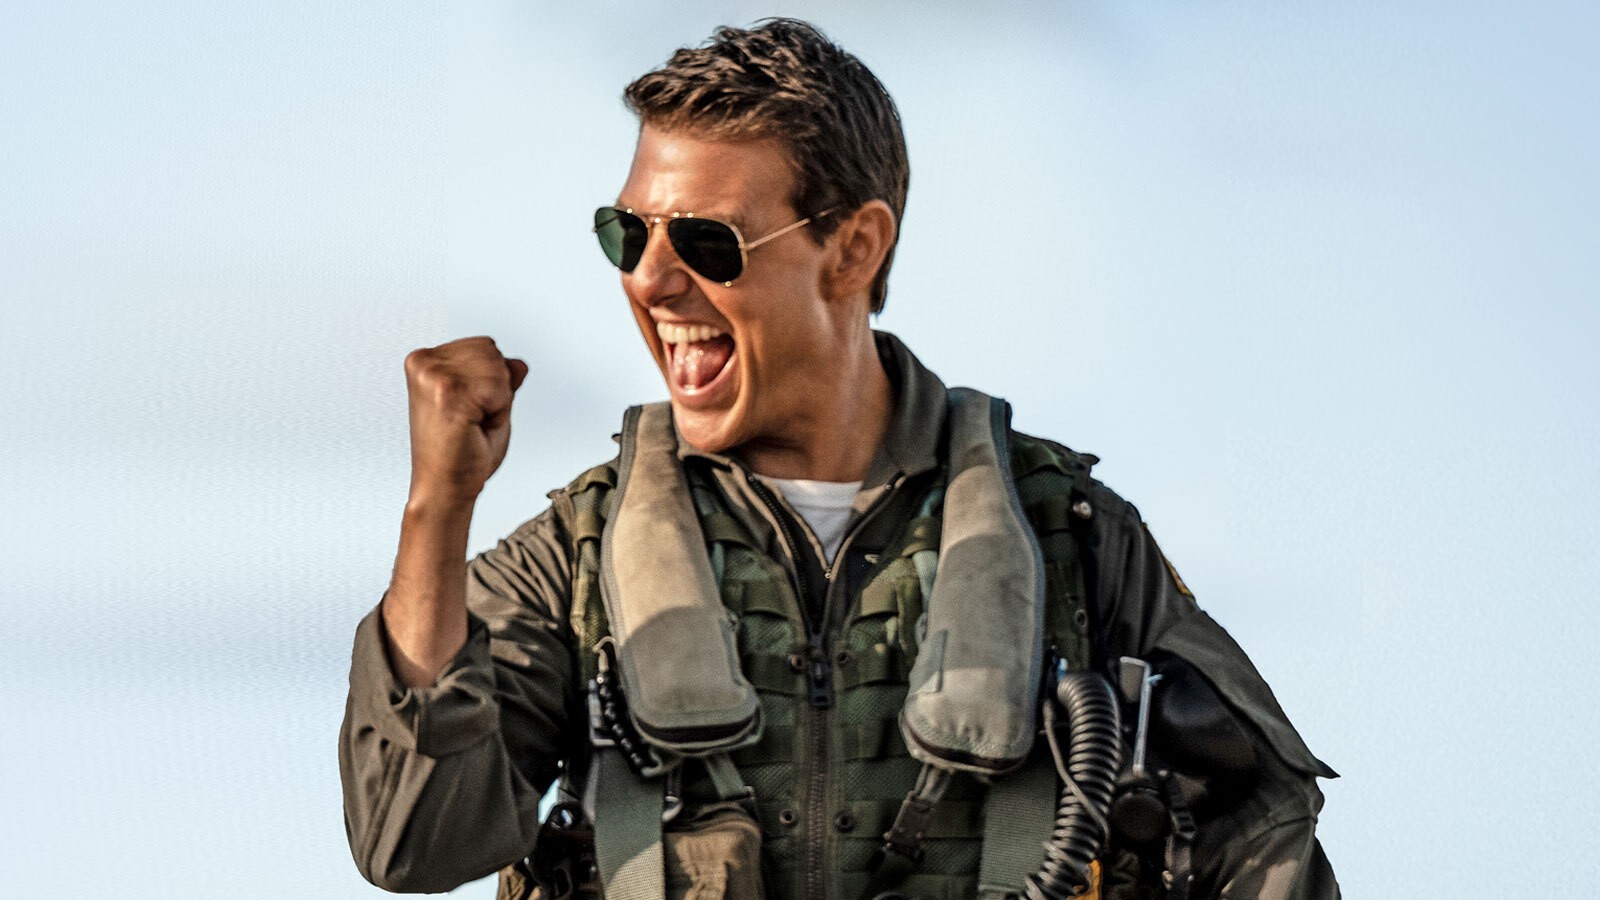 Tom Cruise smiling and cheering in a still from Top Gun: Maverick